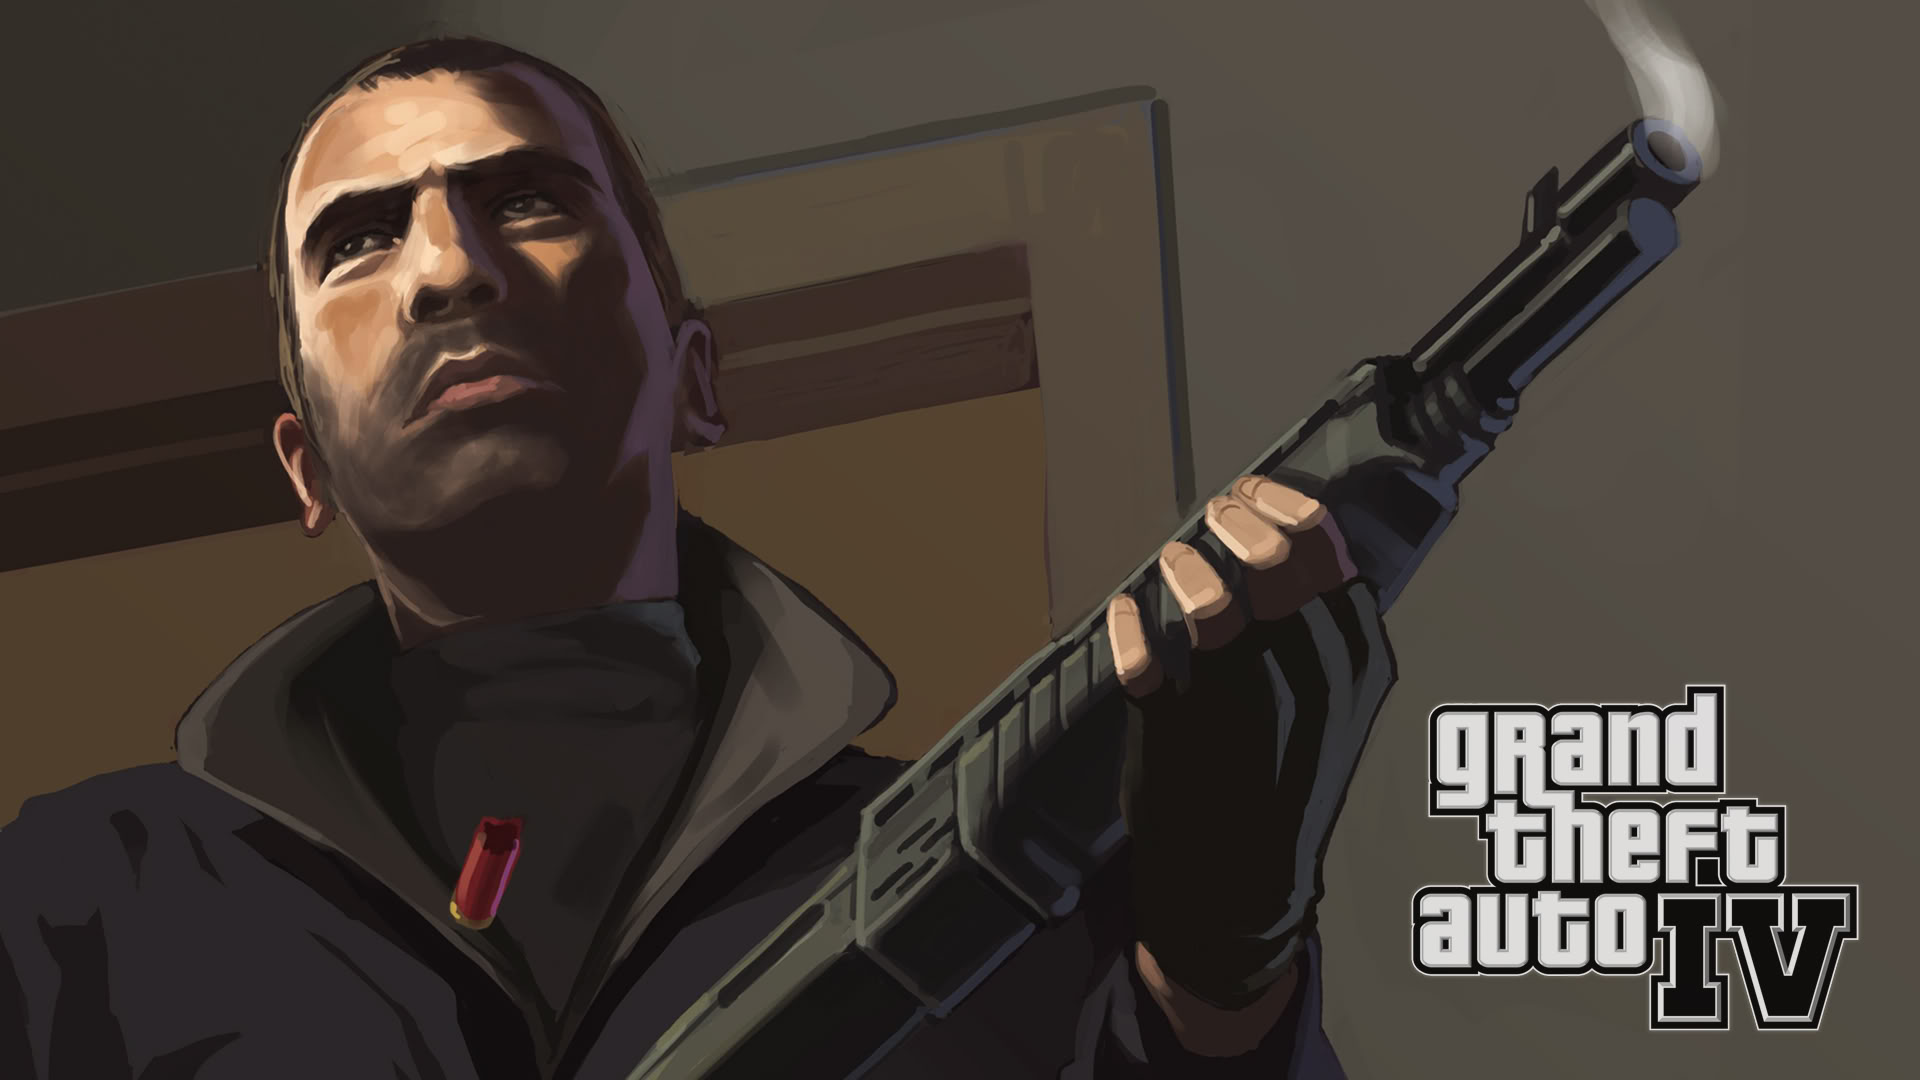 Gta 4 Hd Wallpapers For Mobile